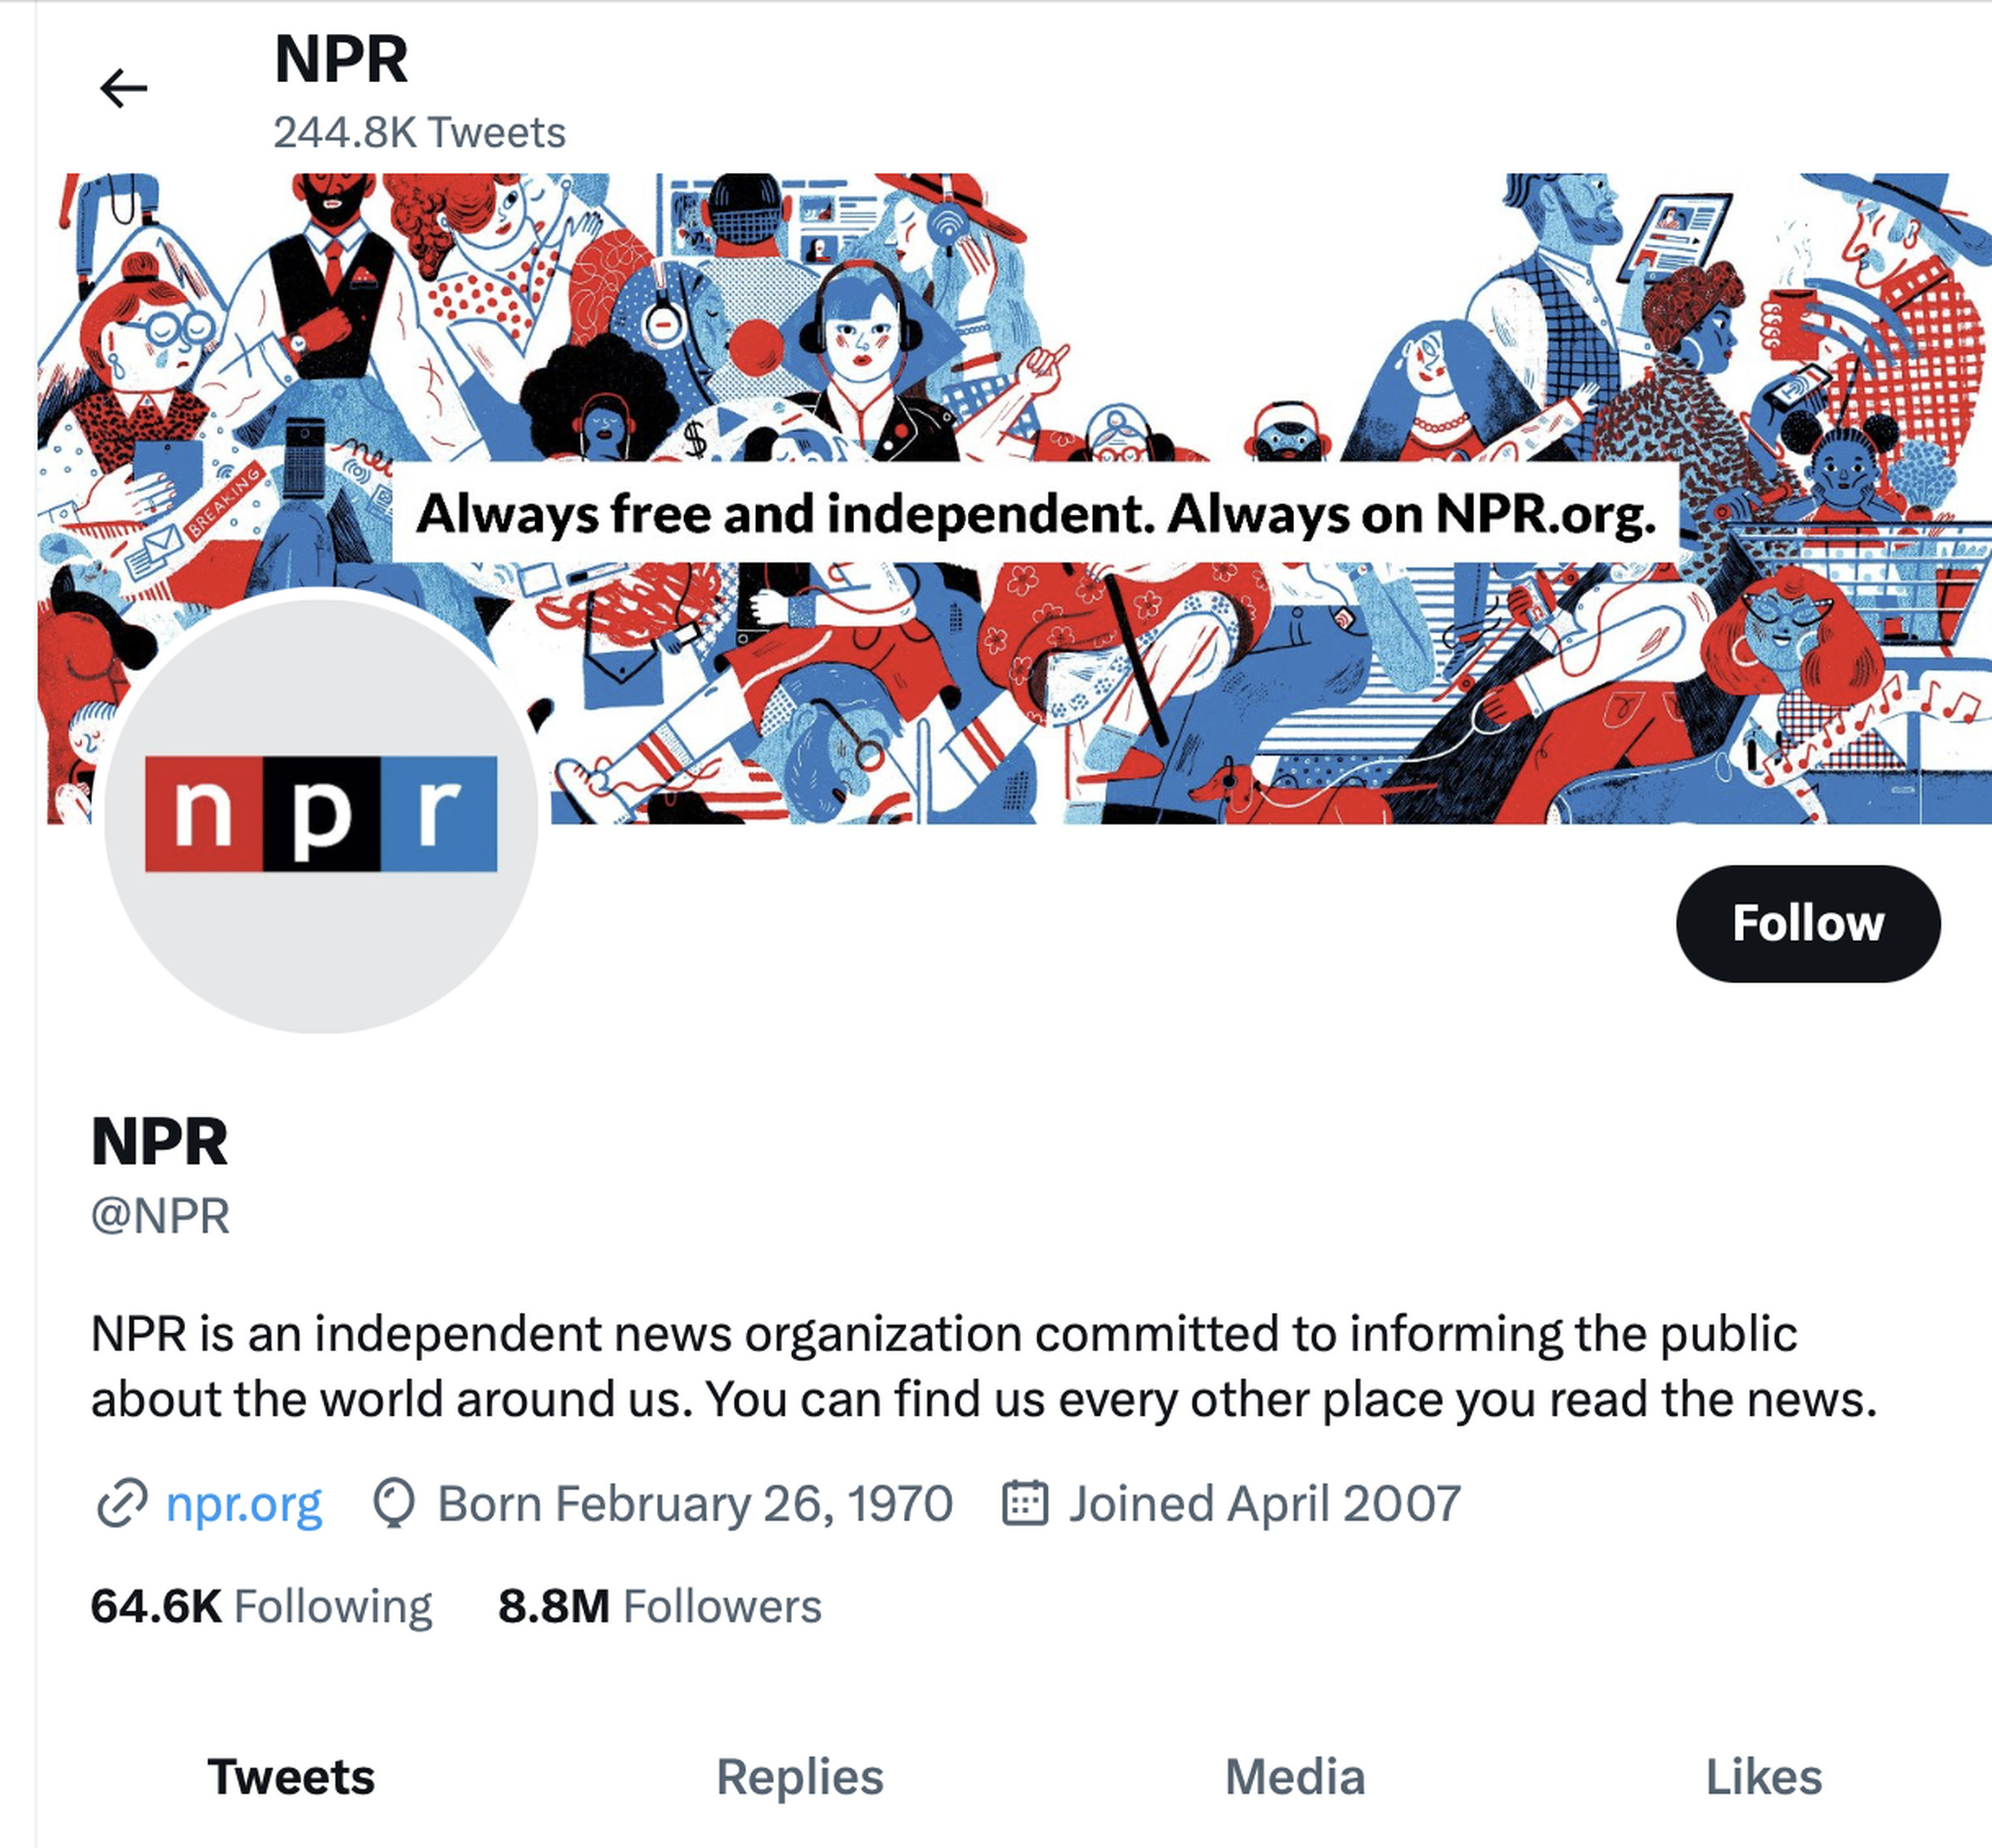 NPR’s profile no longer has a “state-affiliated” media label.